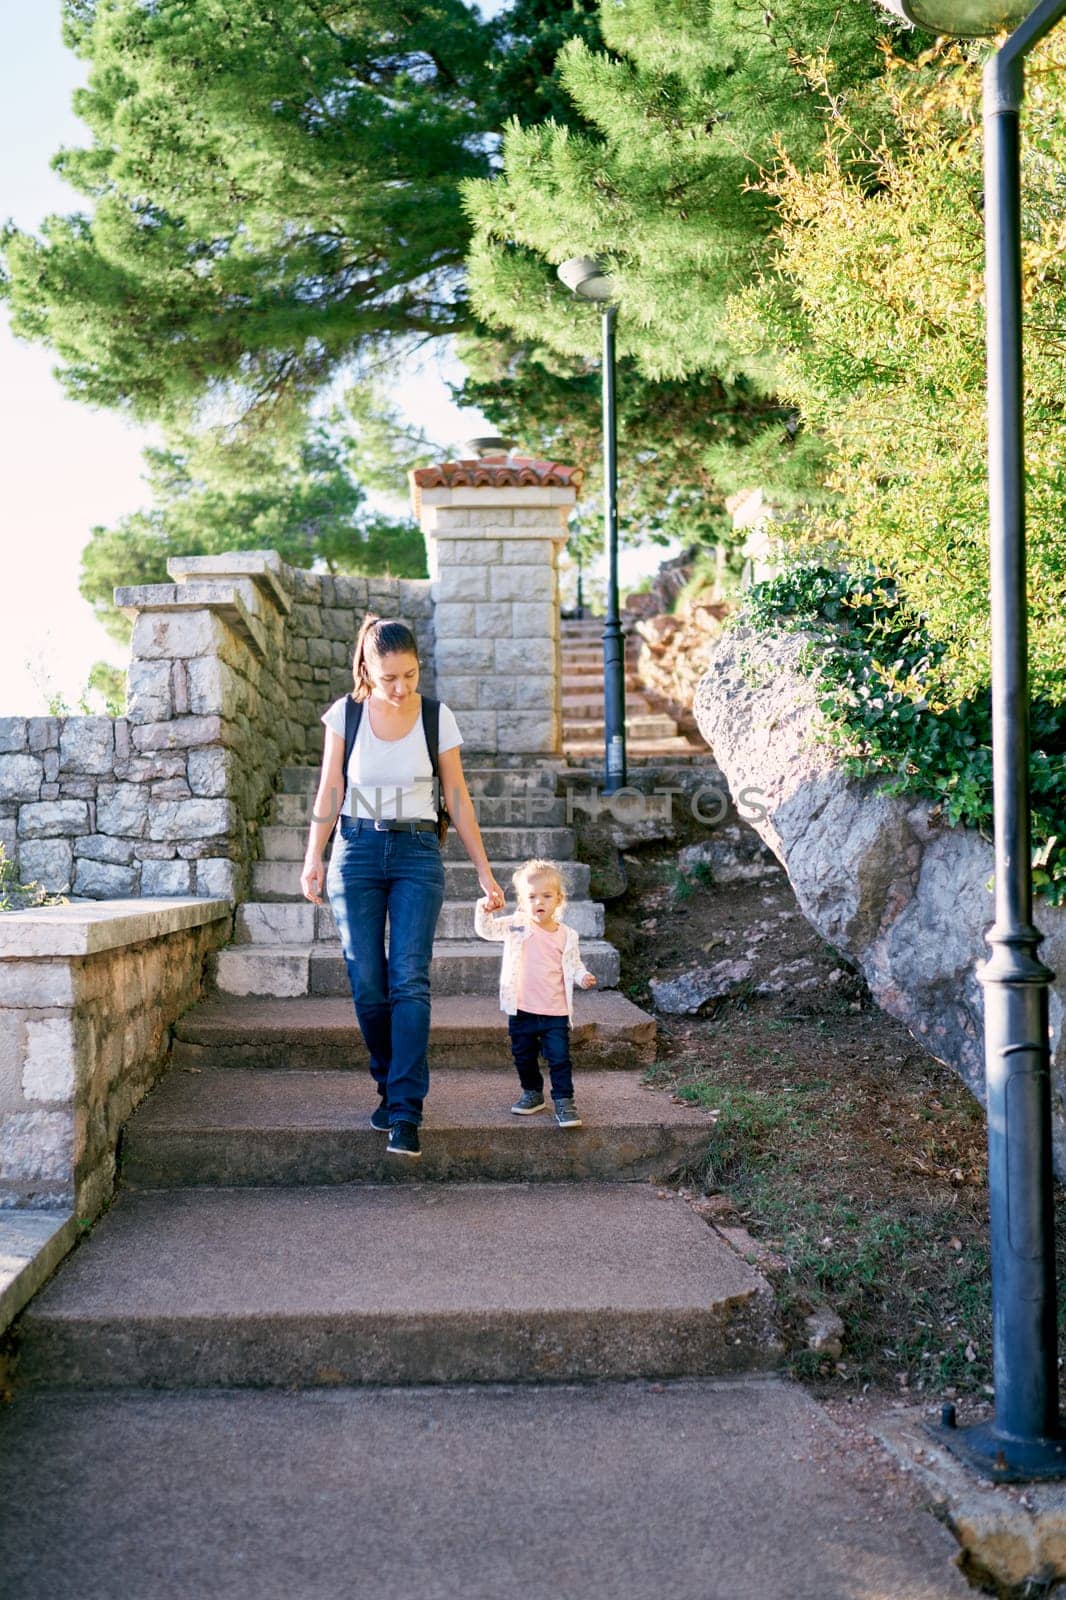 Mom and little girl walk up the steps in the park from the hill holding hands by Nadtochiy